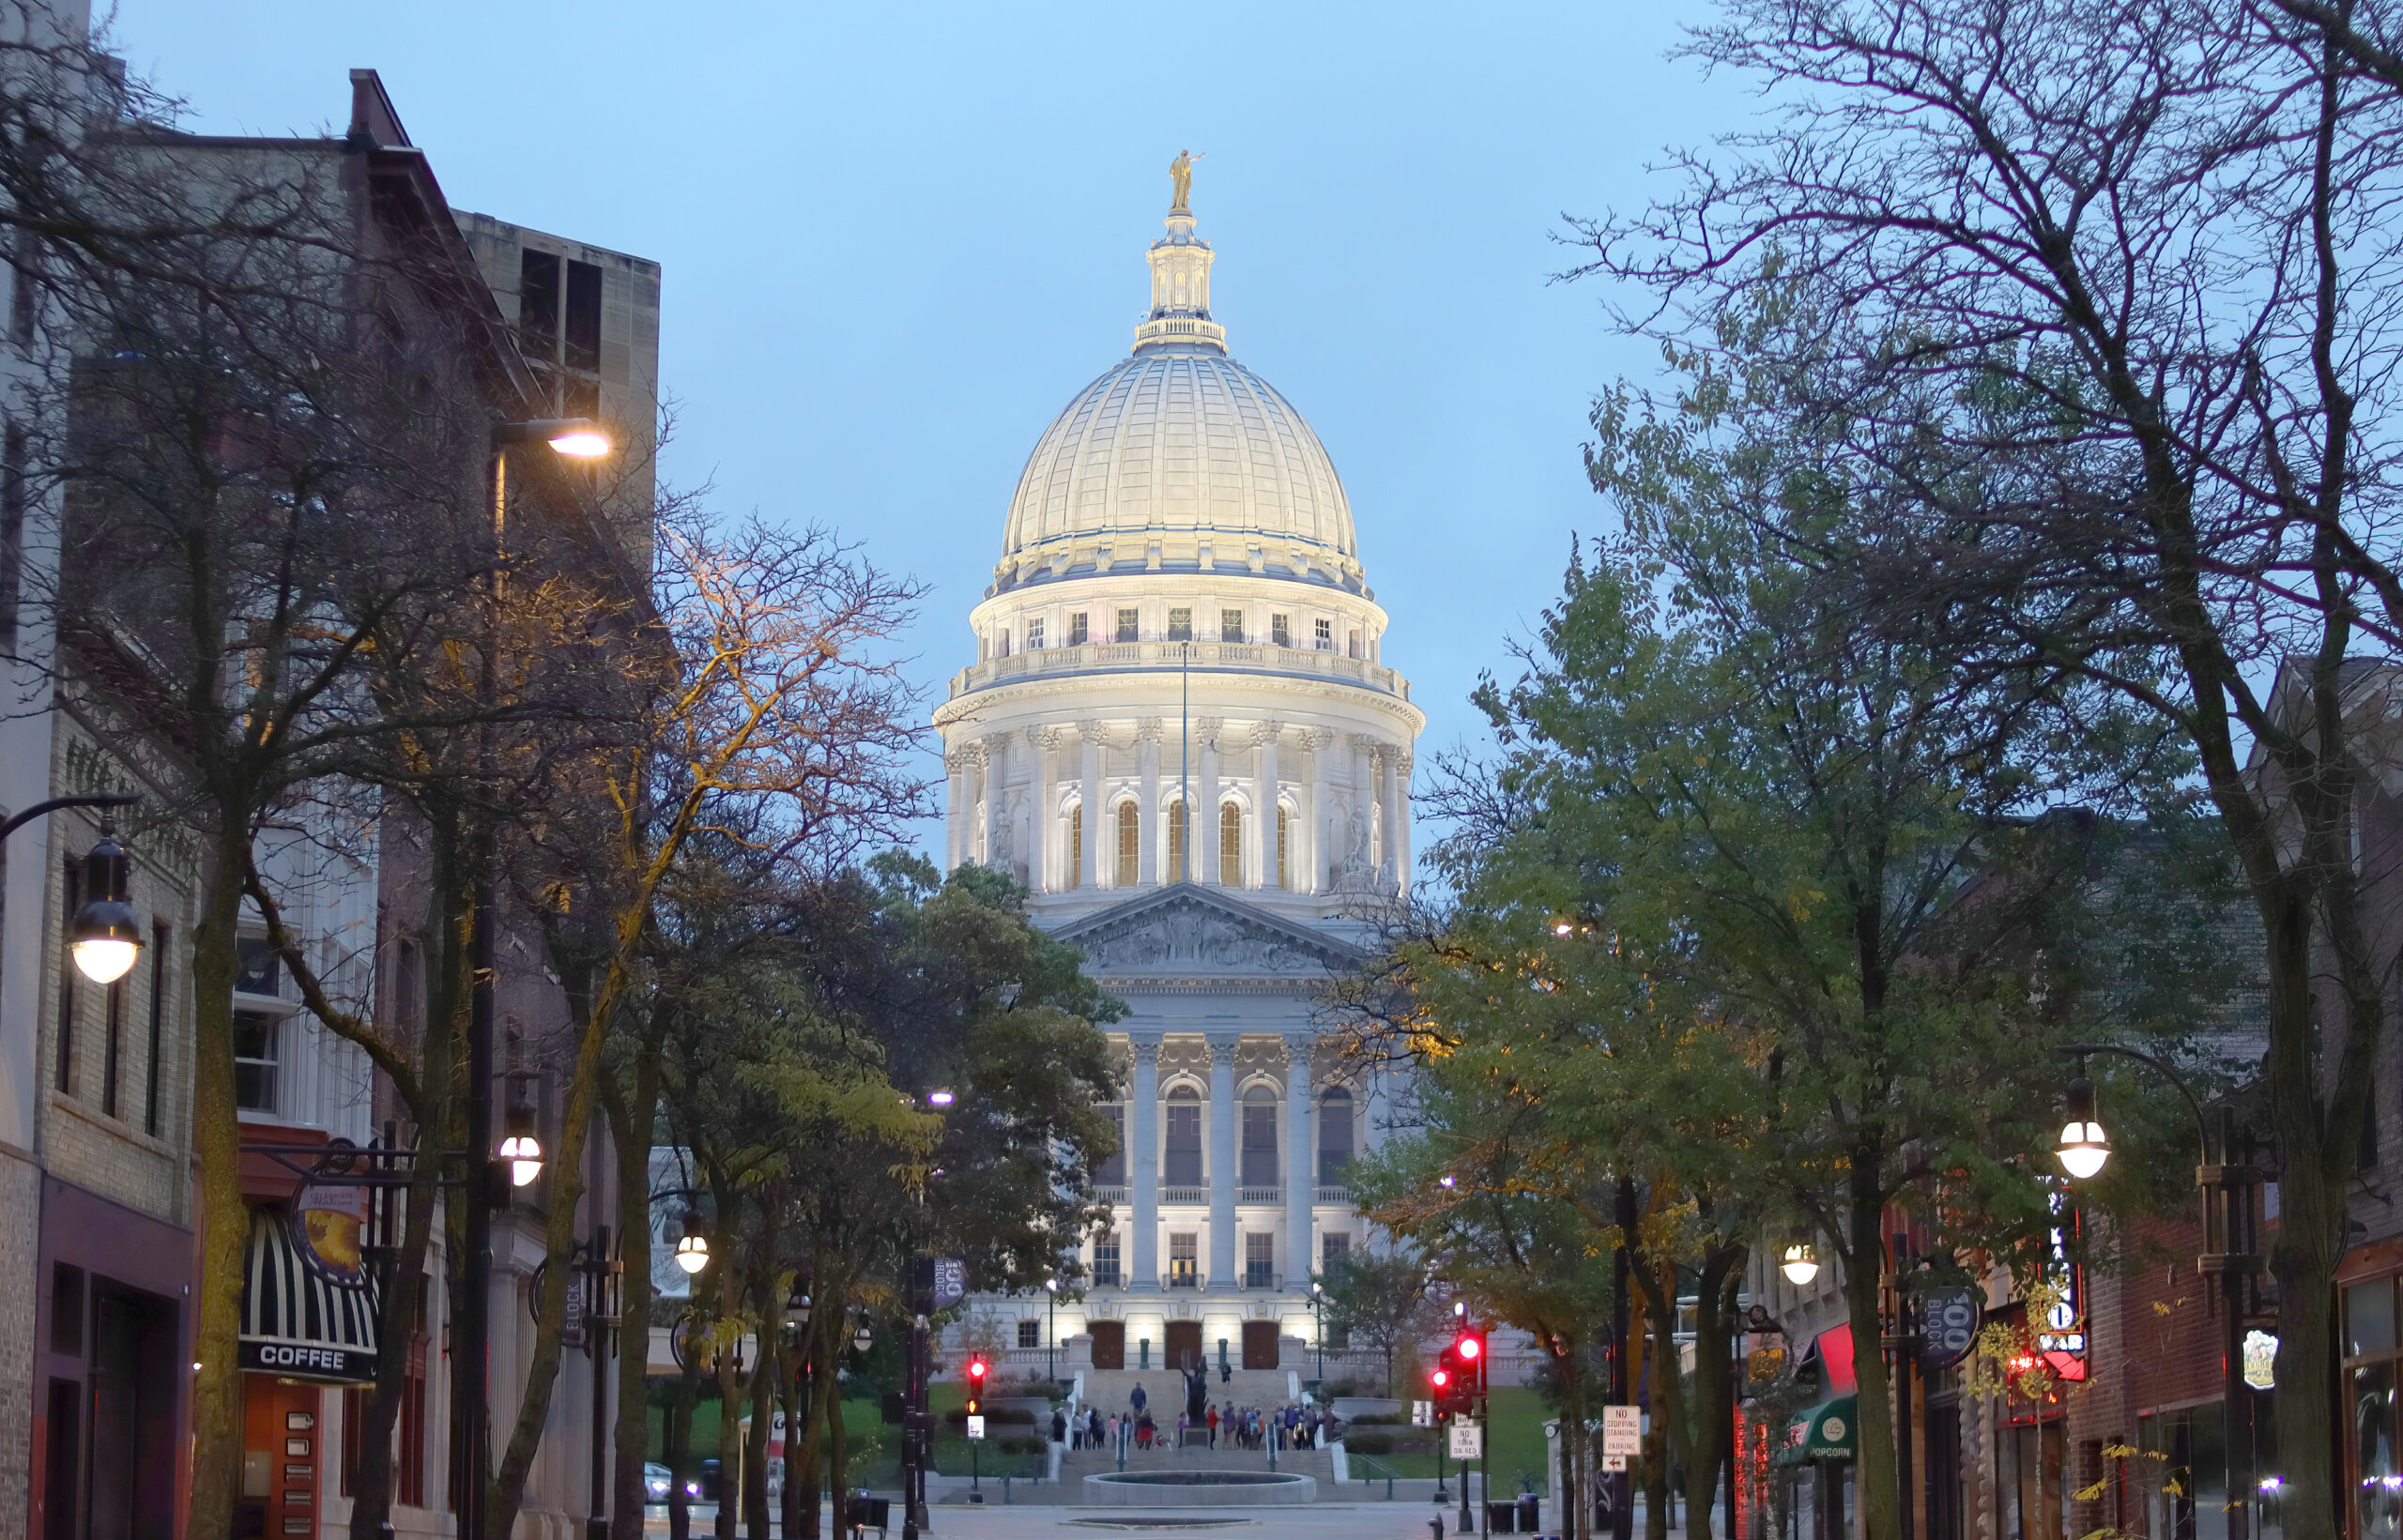 The Wisconsin State Capital view from State Street in Madison